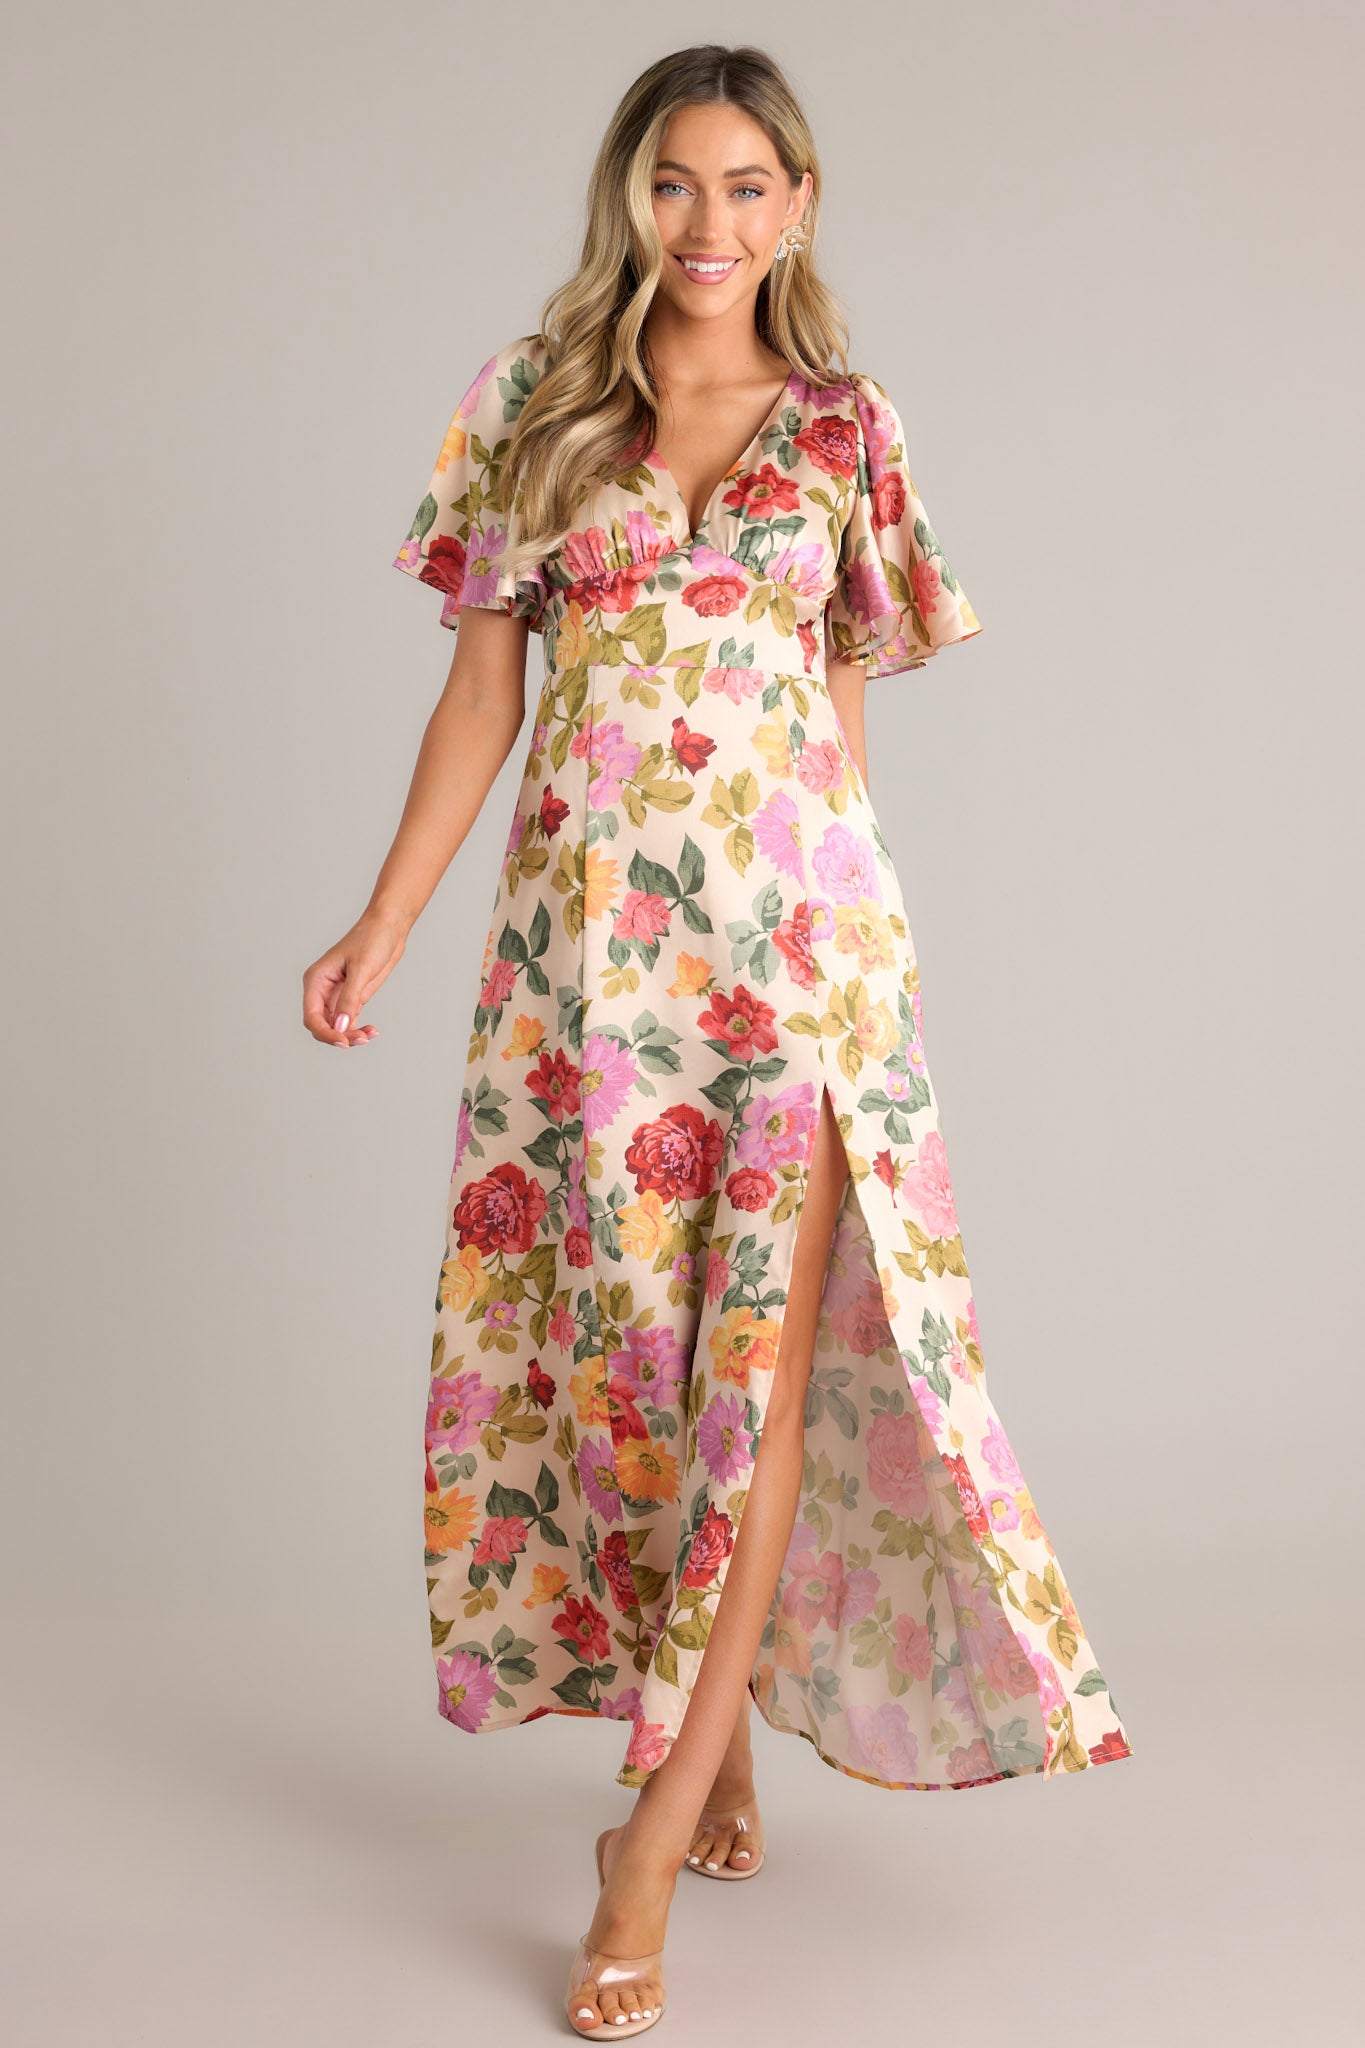 Beige floral maxi dress with a deep V-neckline, flutter sleeves, a fitted waist, A-line skirt, and a warm floral pattern throughout.